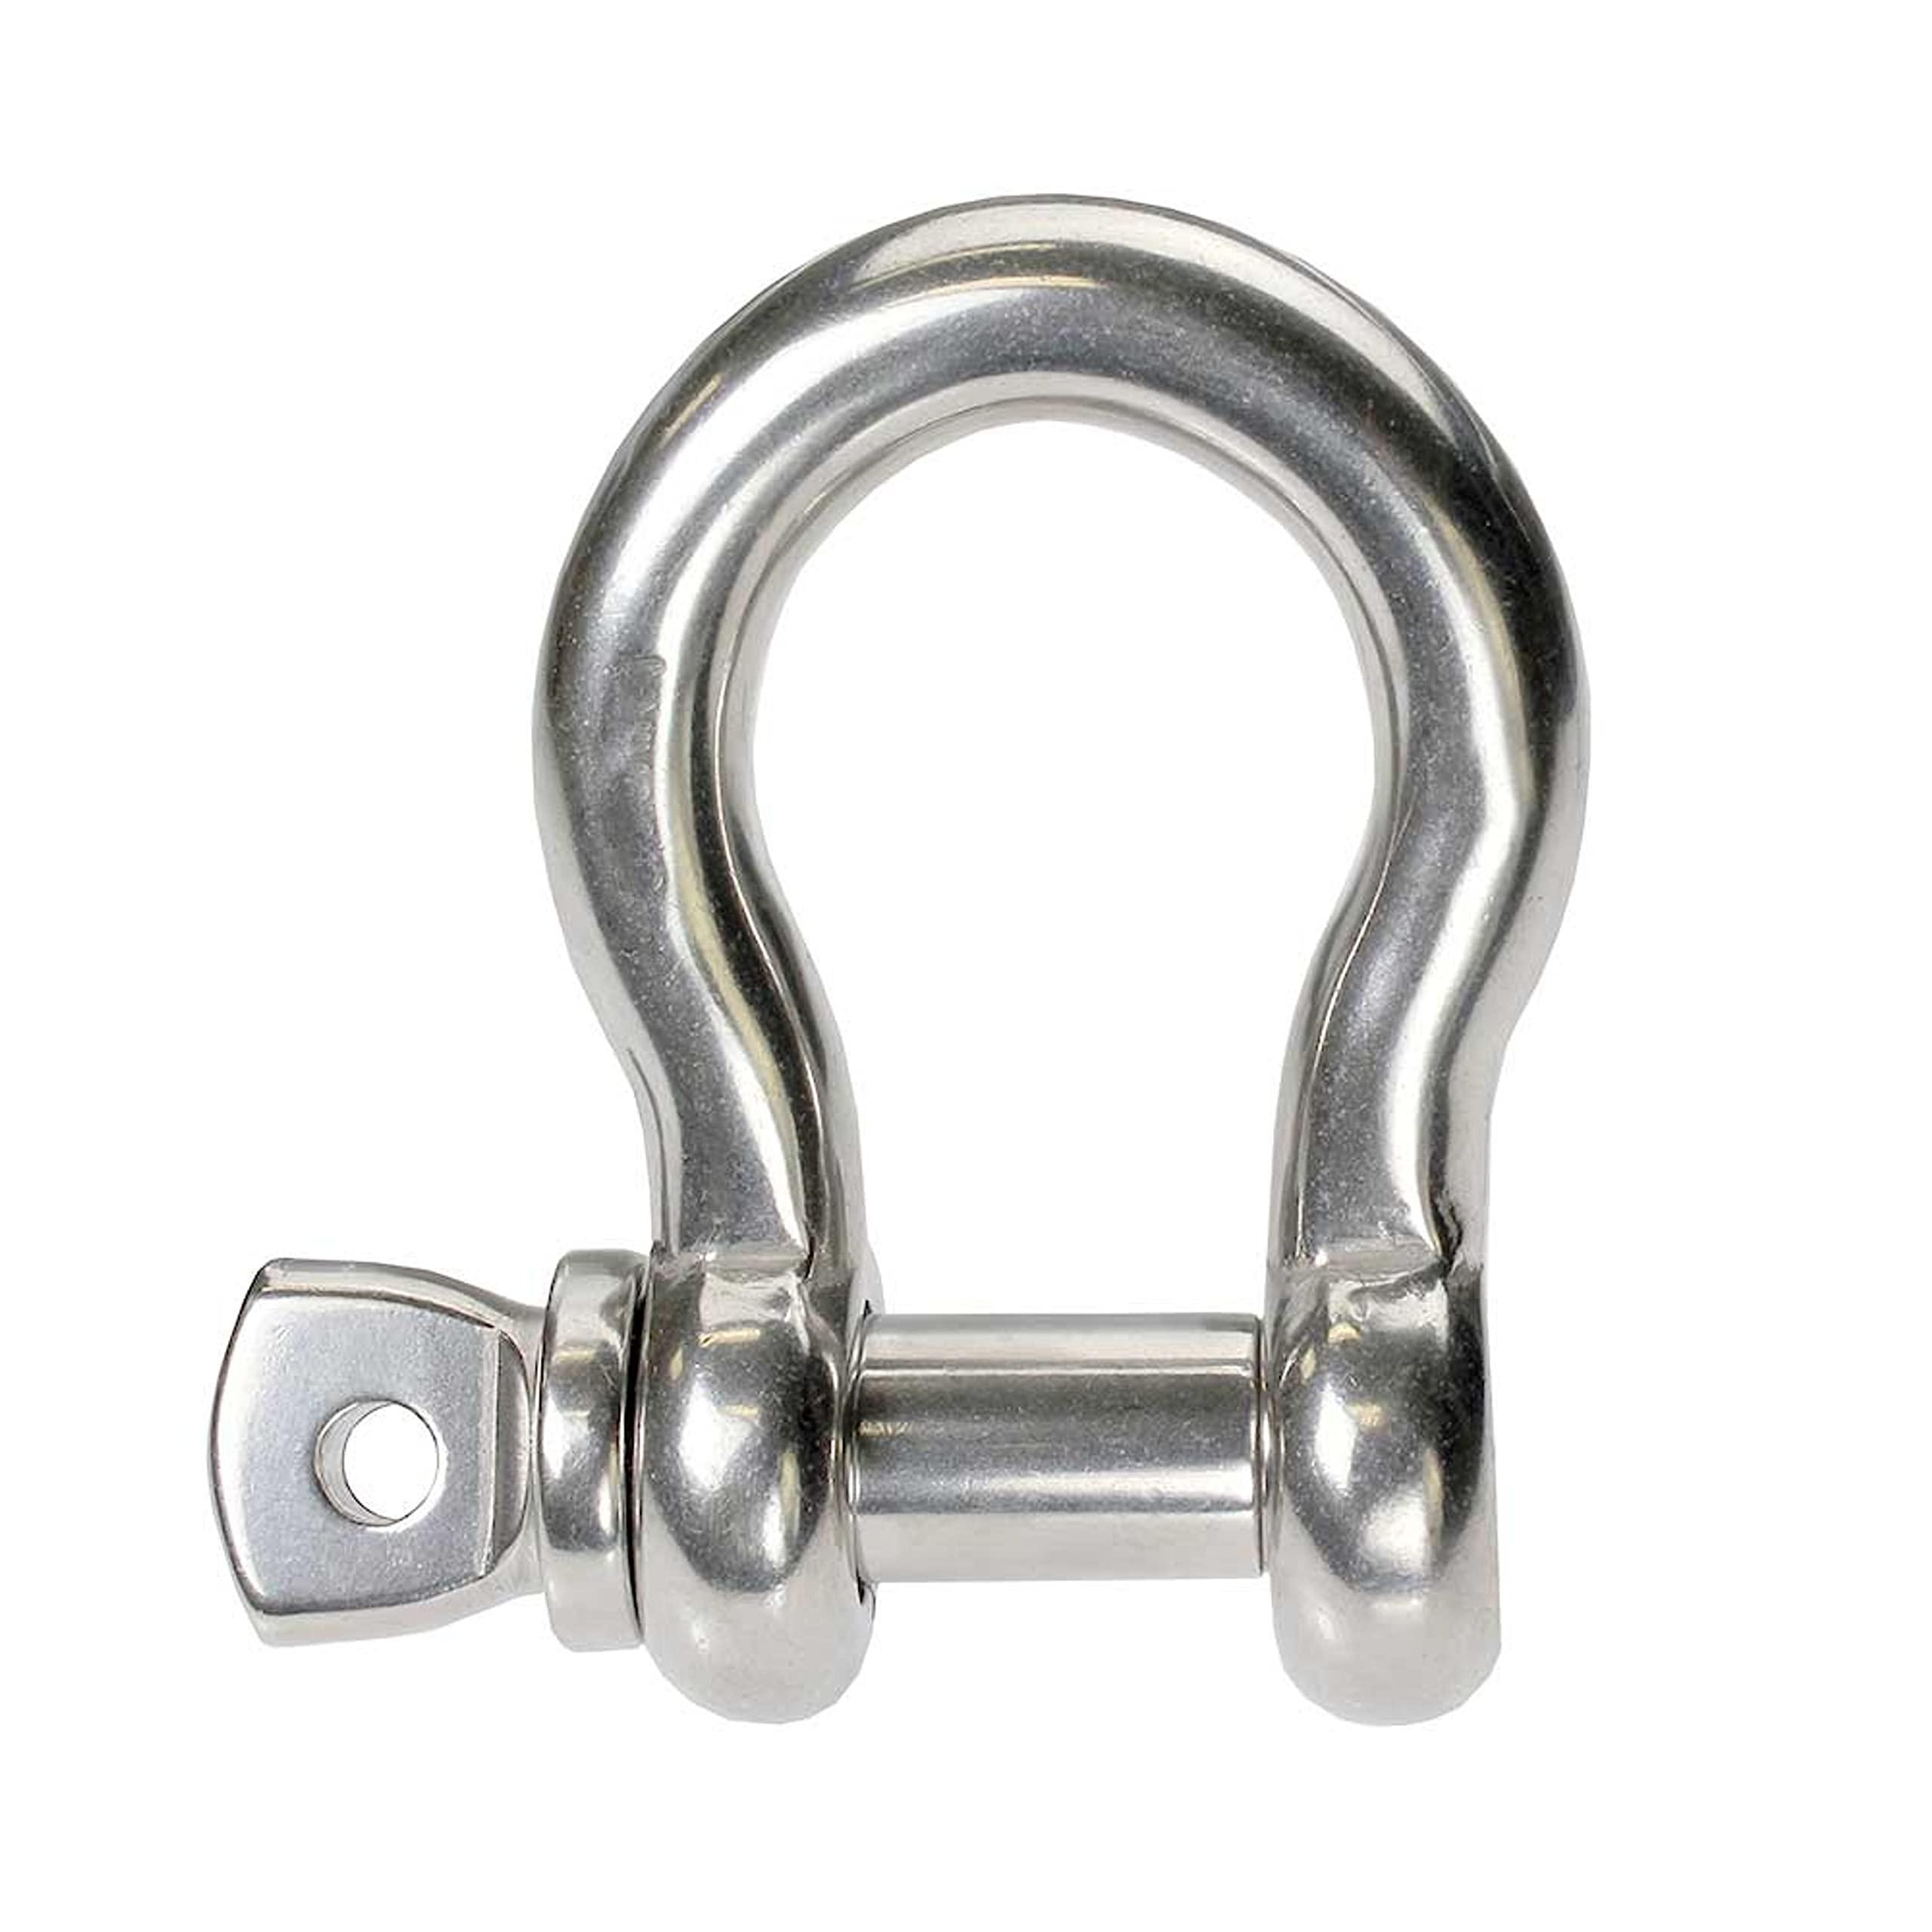 images-stainless-steel-bow-shackles-stainless-steel-shackle-sakkelit-lyftschacklar-lifting-shackles-grilletes-acero-inox-naytika-kleidia-wire-rope-accessories-manille-lyre-71t6qkfj18L